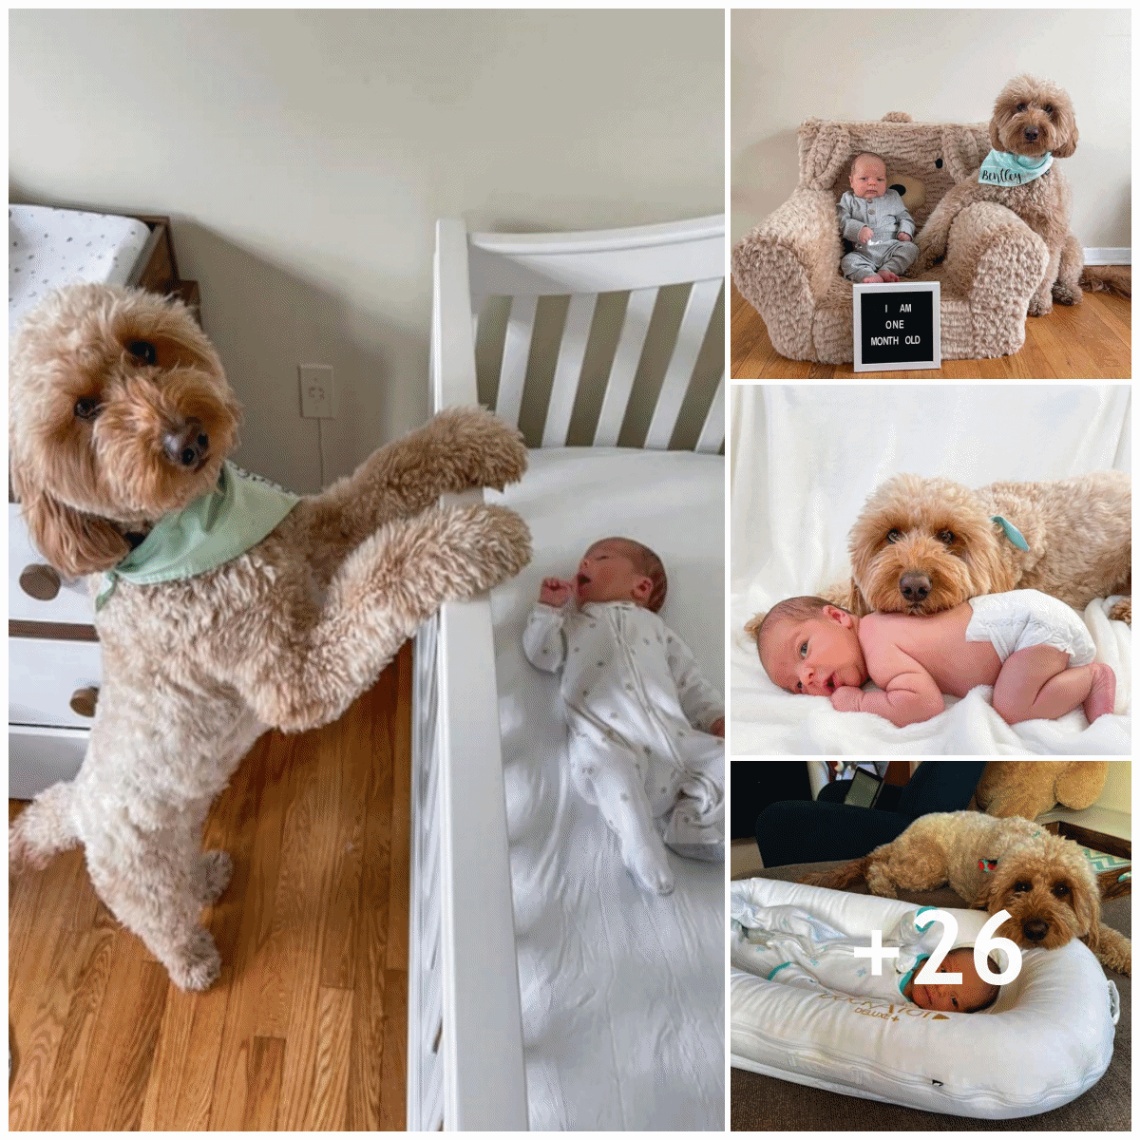 Adorable nanny dog Caring for a newborn baby, the online community is delighted.